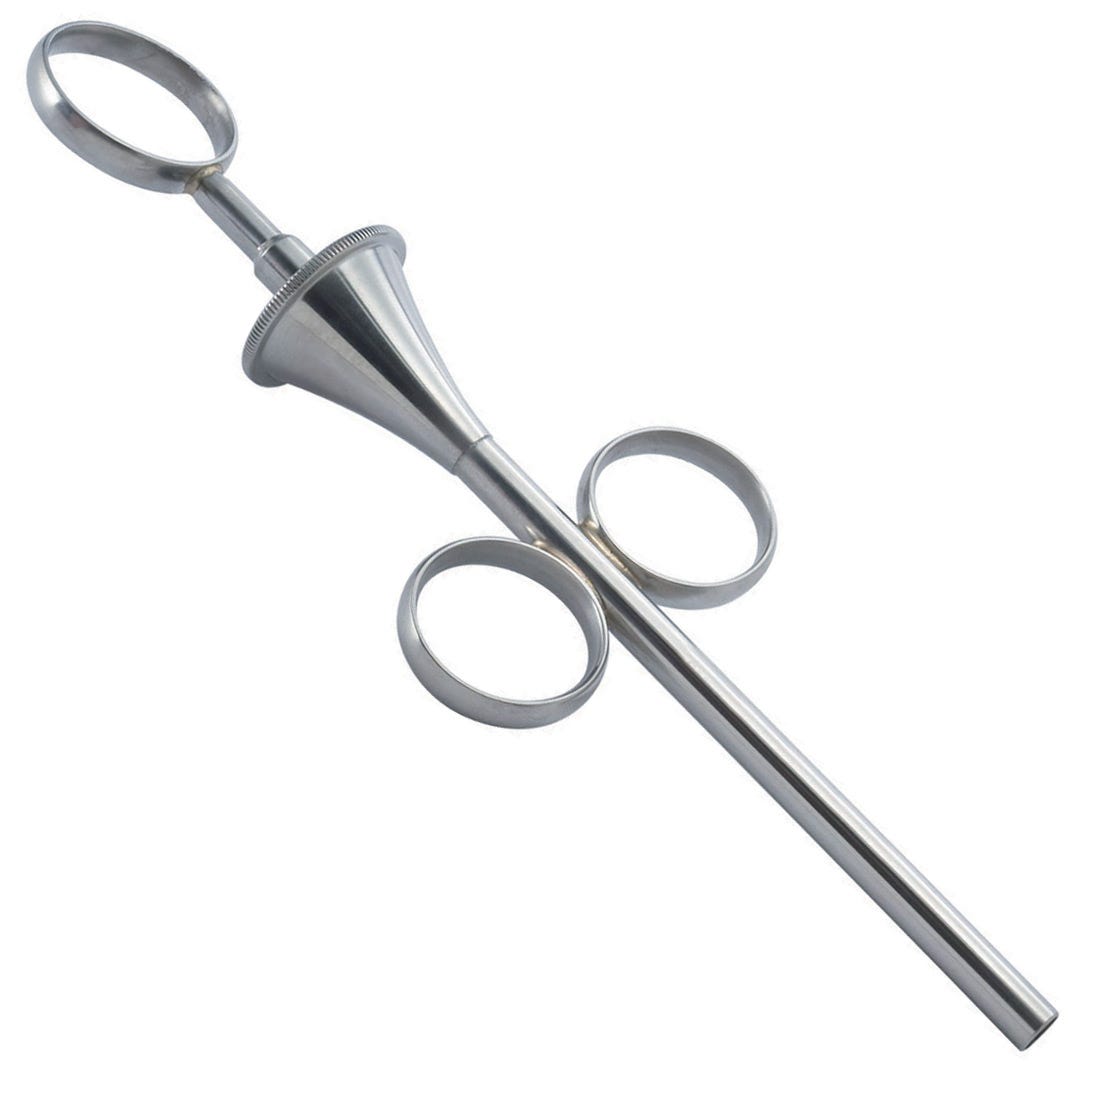 Stainless Steel Graft Delivery Syringe with funnel- 5.0mm Opening (Straight)